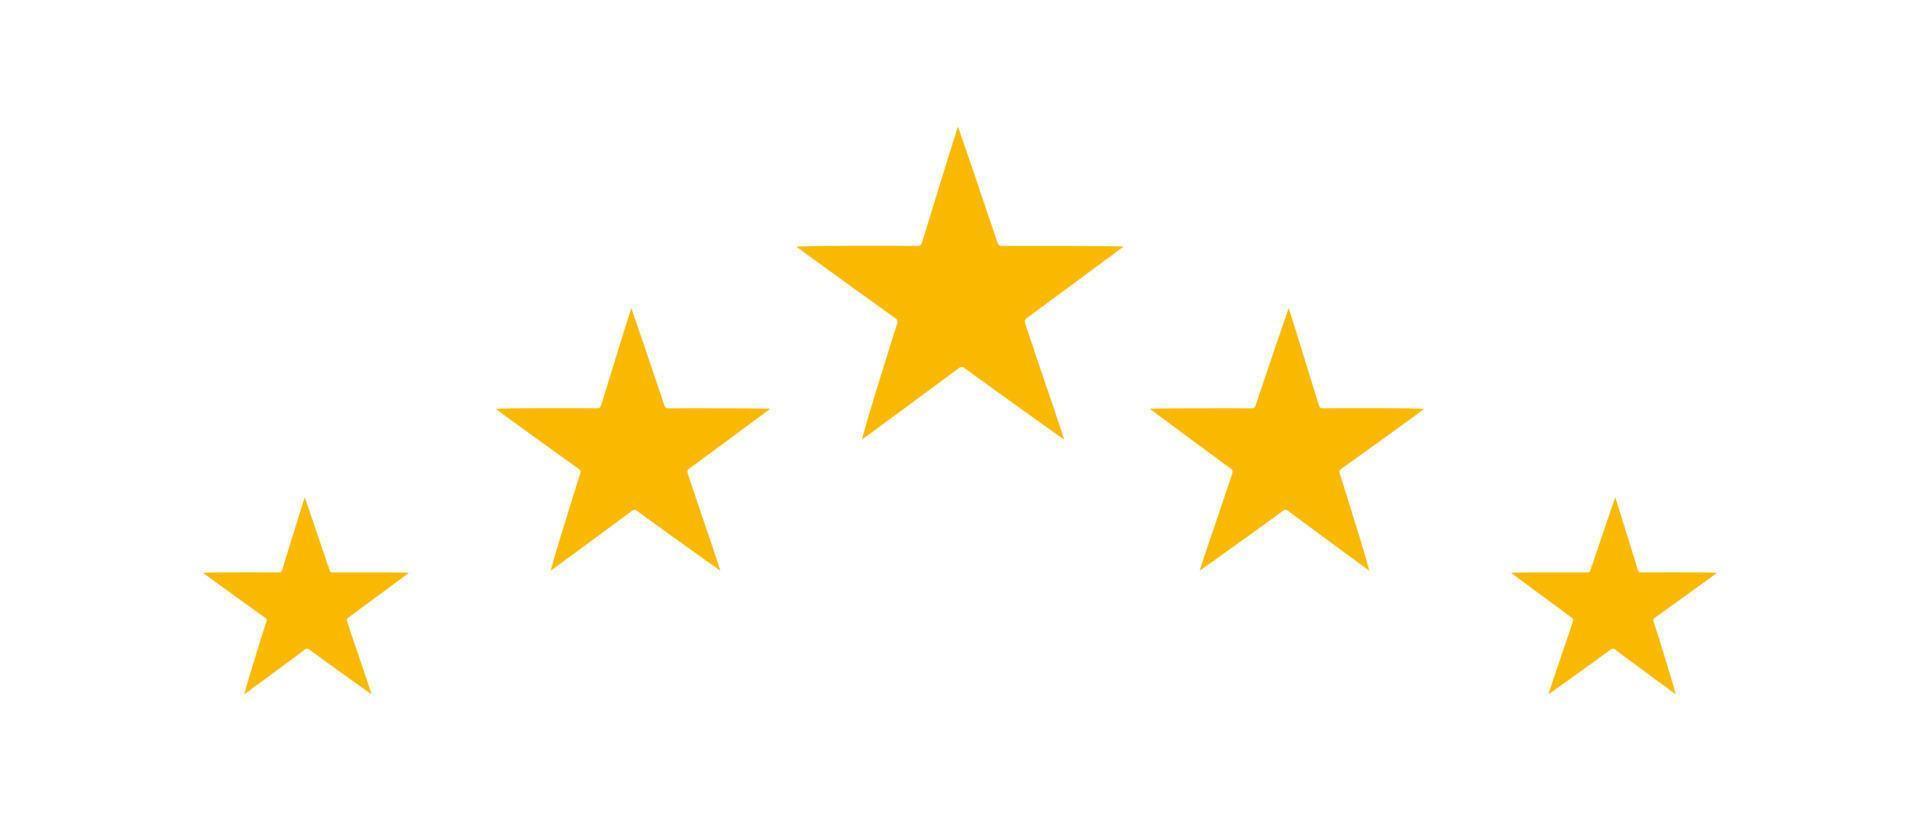 Five star rating icon. Balanced star drawing. Vector illustration. Superiority. Gold stars. Award icon on white background.